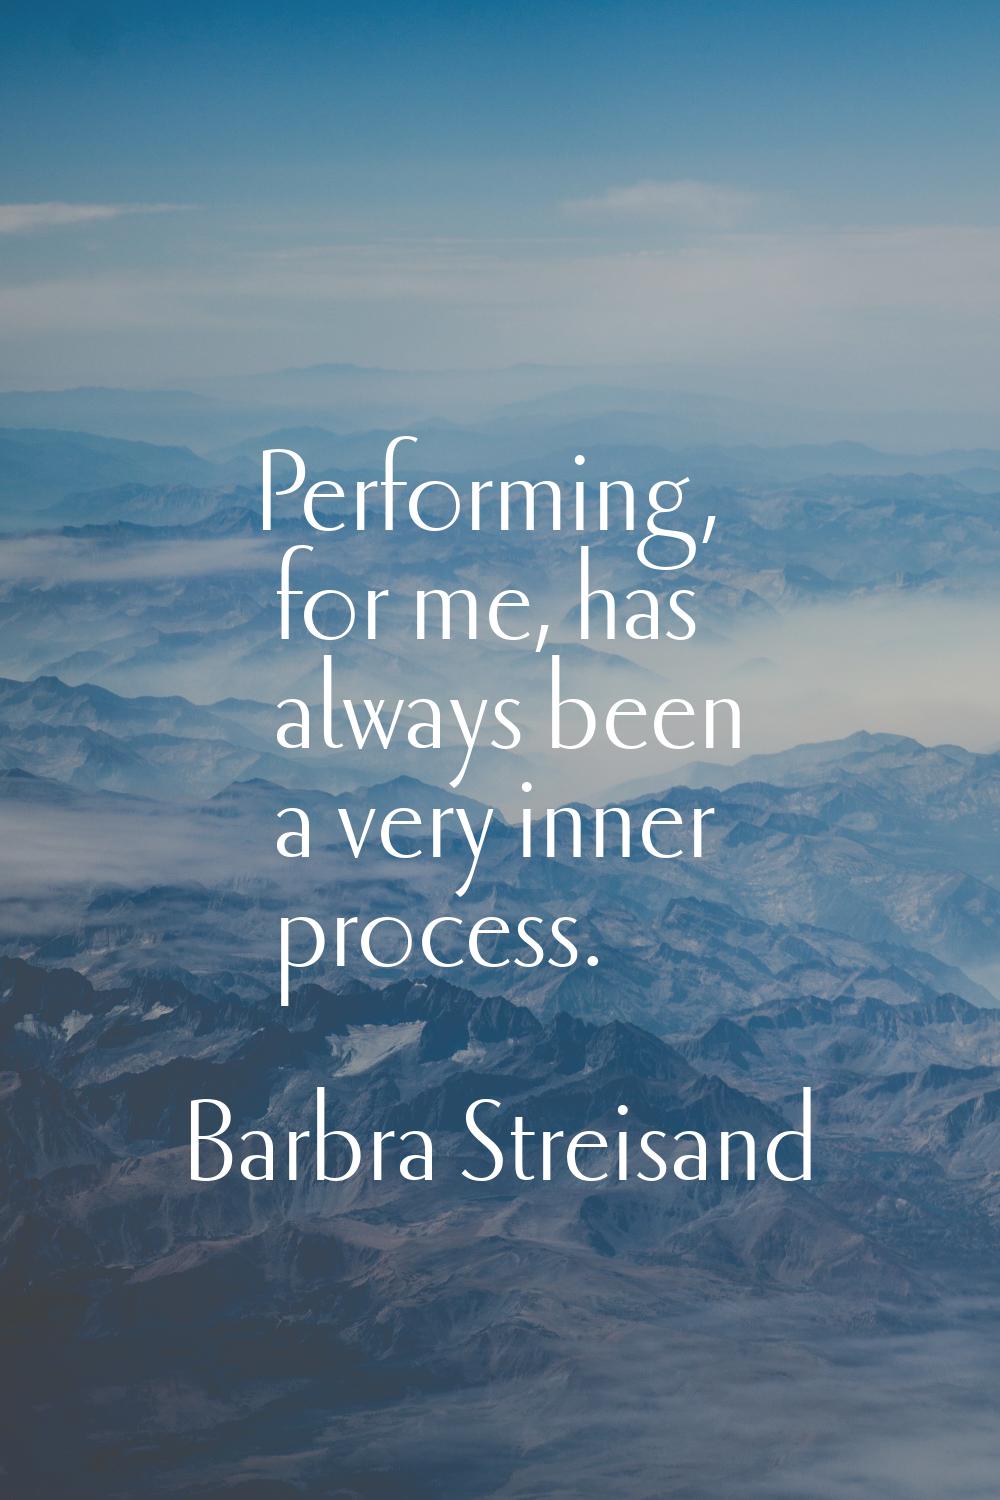 Performing, for me, has always been a very inner process.